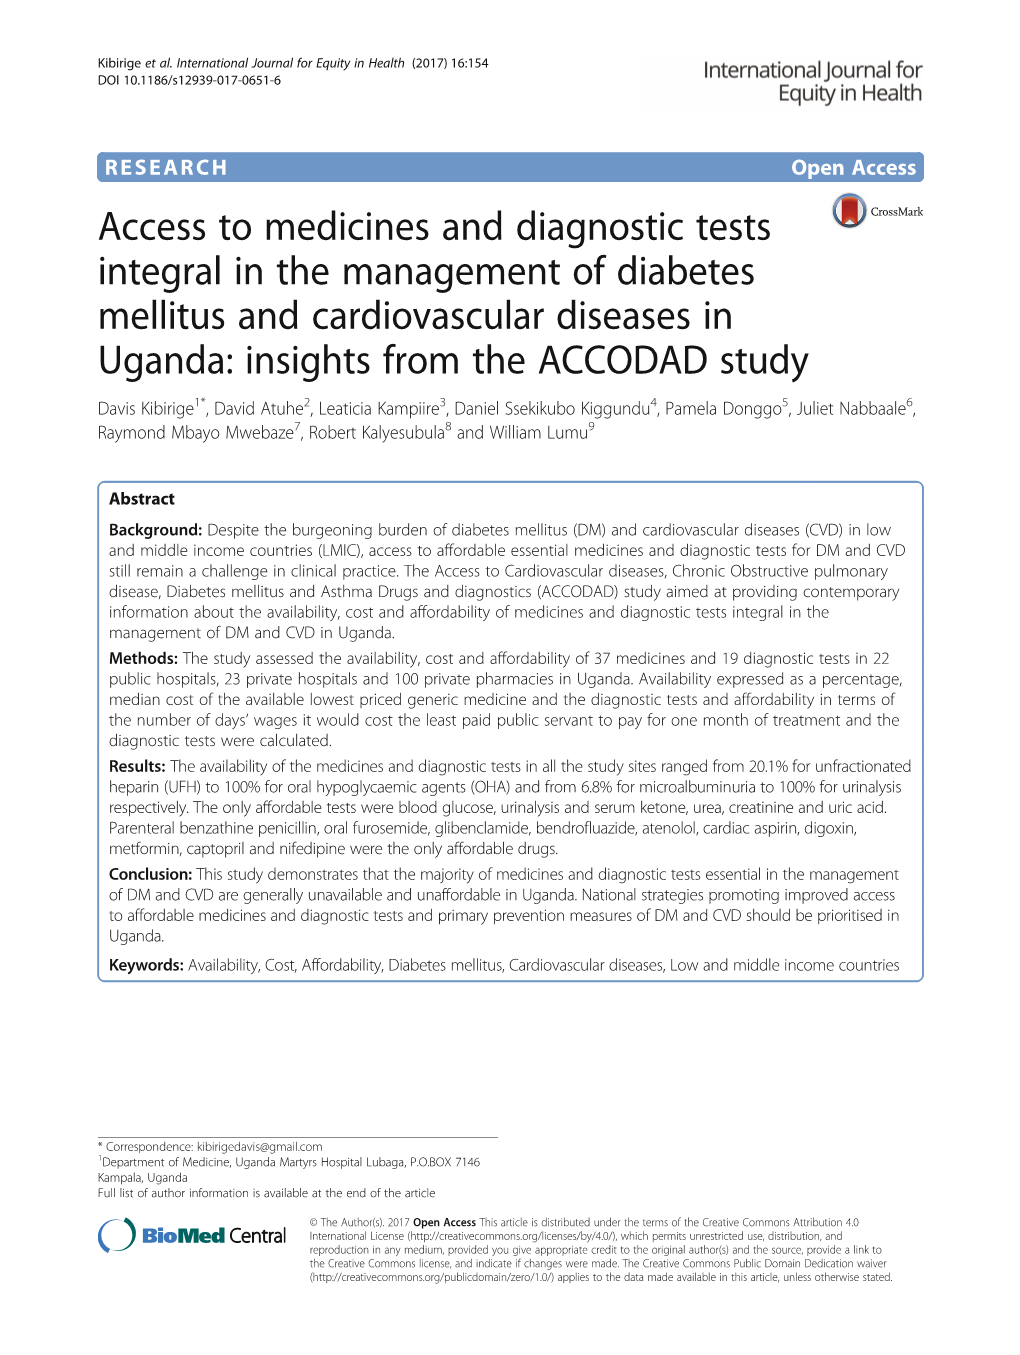 Access to Medicines and Diagnostic Tests Integral in the Management Of